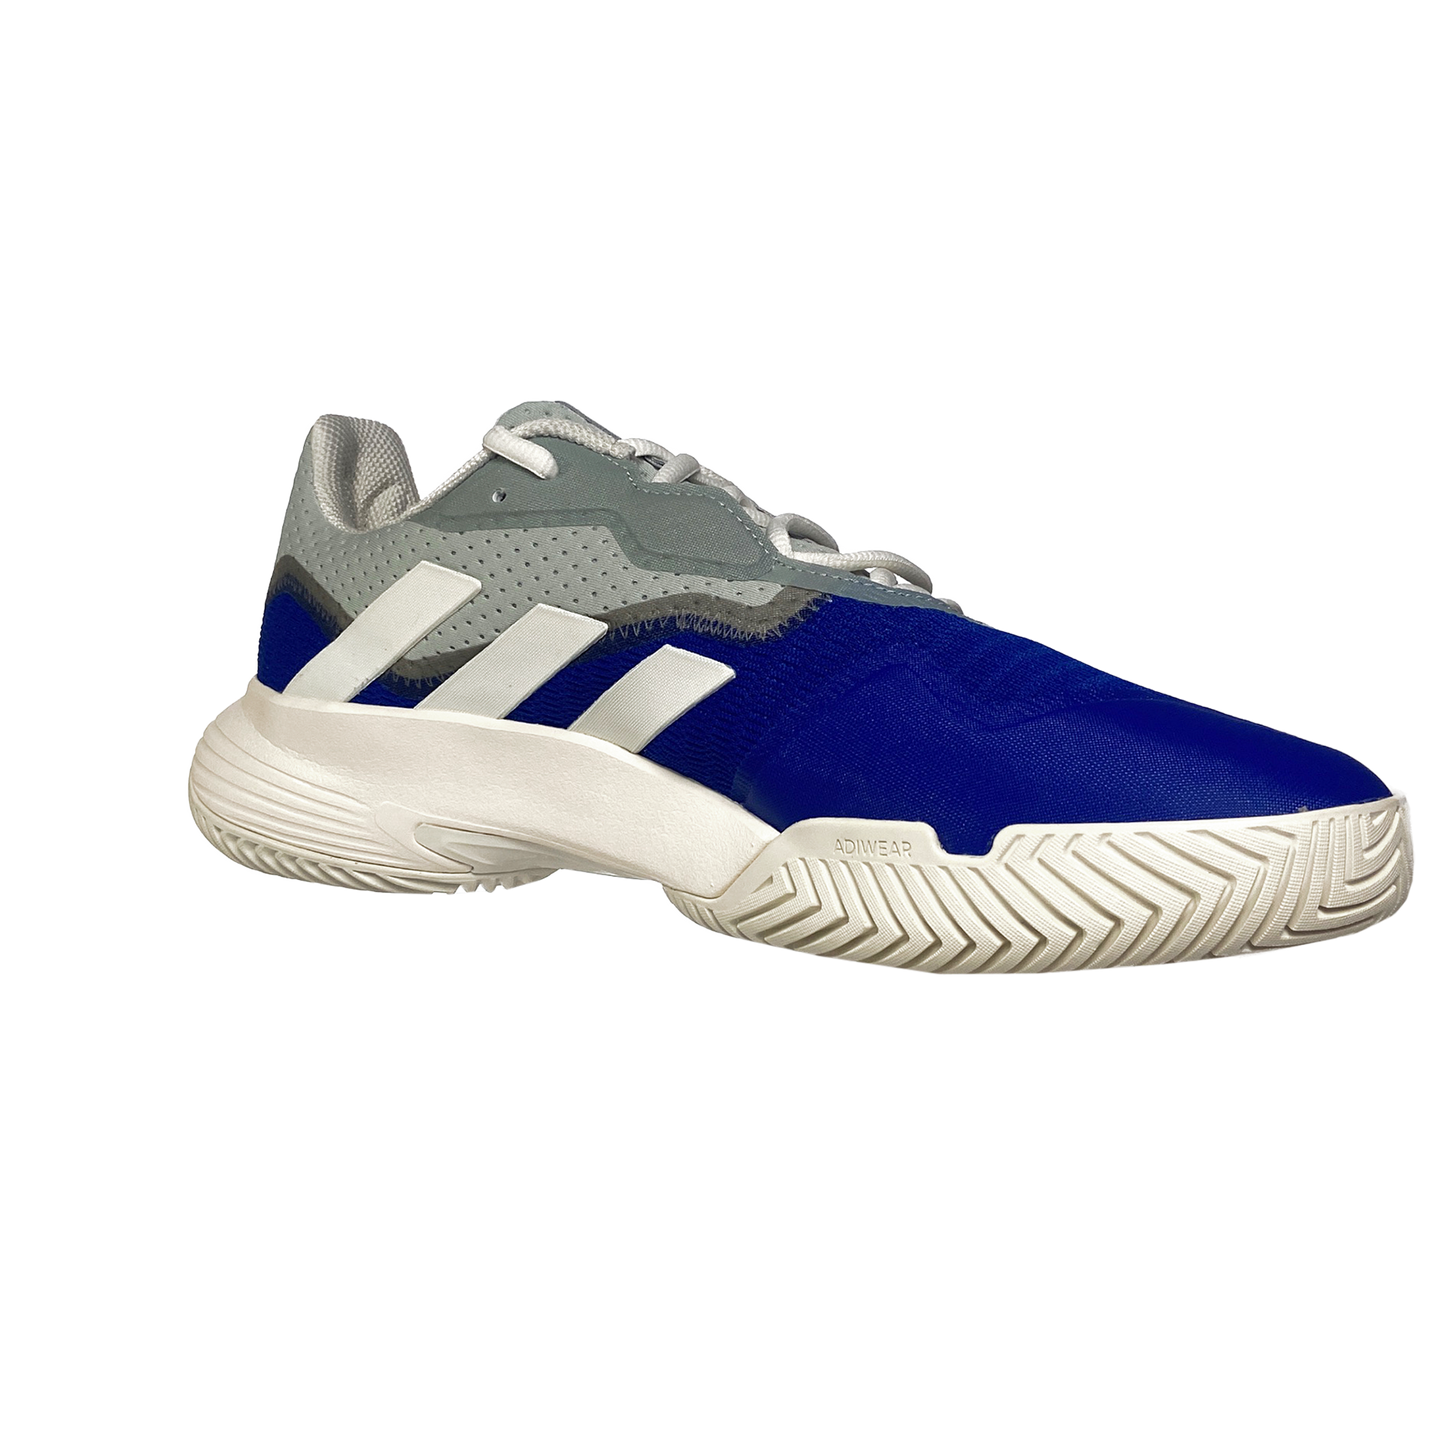 Adidas Homme CourtJam Control ID1536